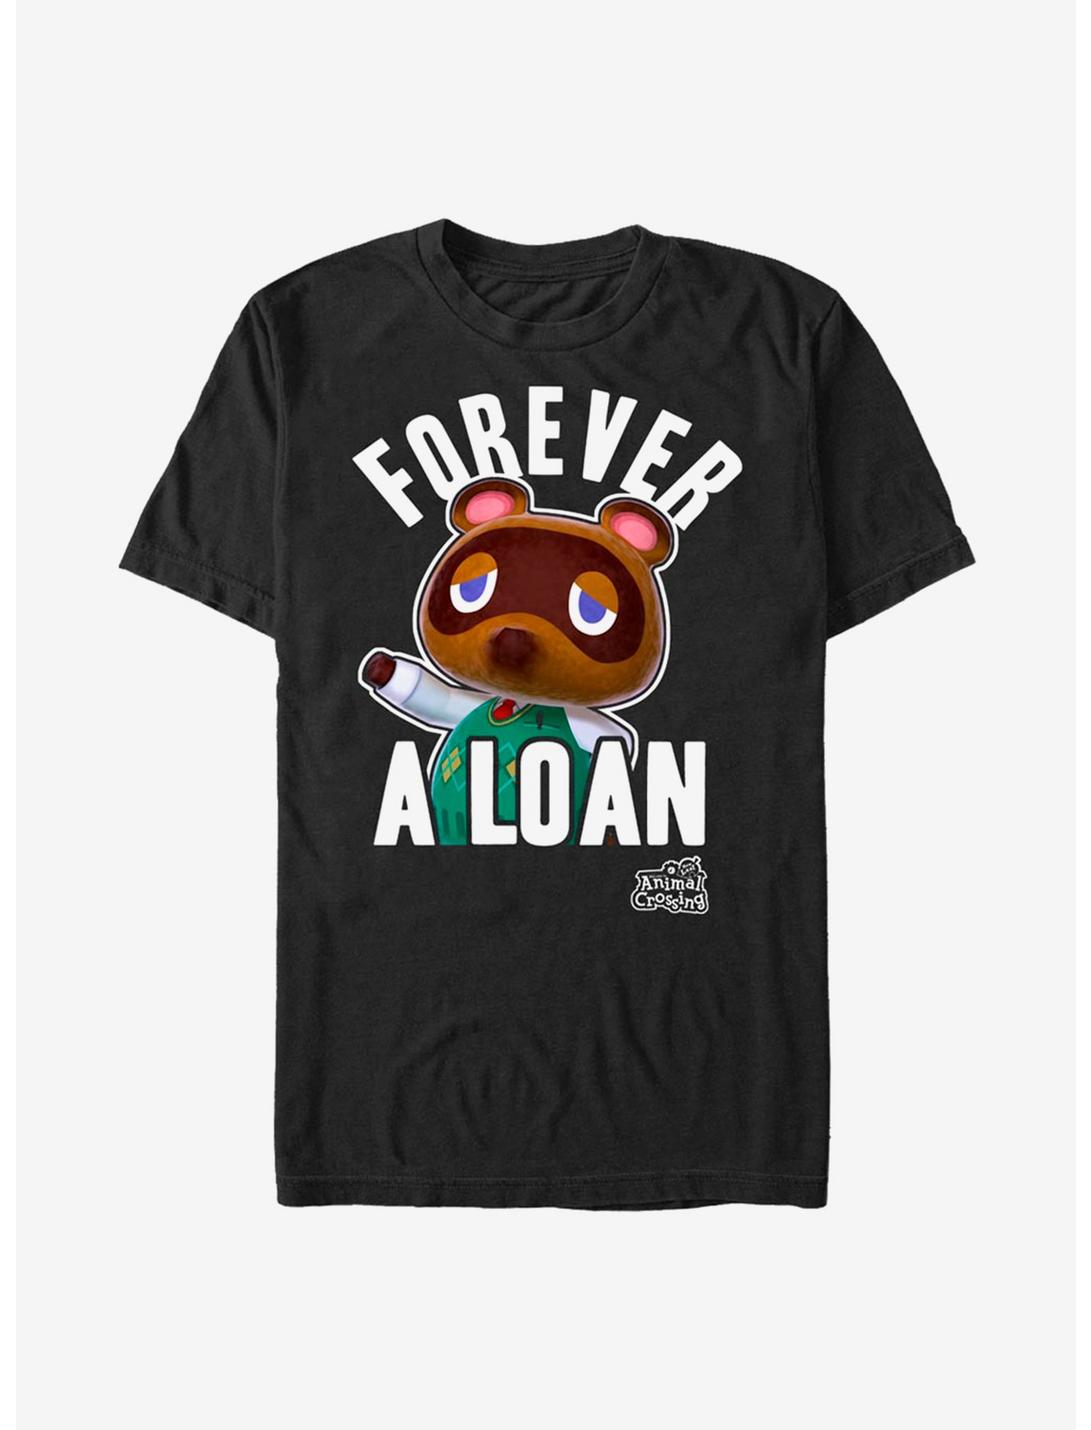 Plus Size Animal Crossing Nook Forever A Loan T-Shirt, BLACK, hi-res